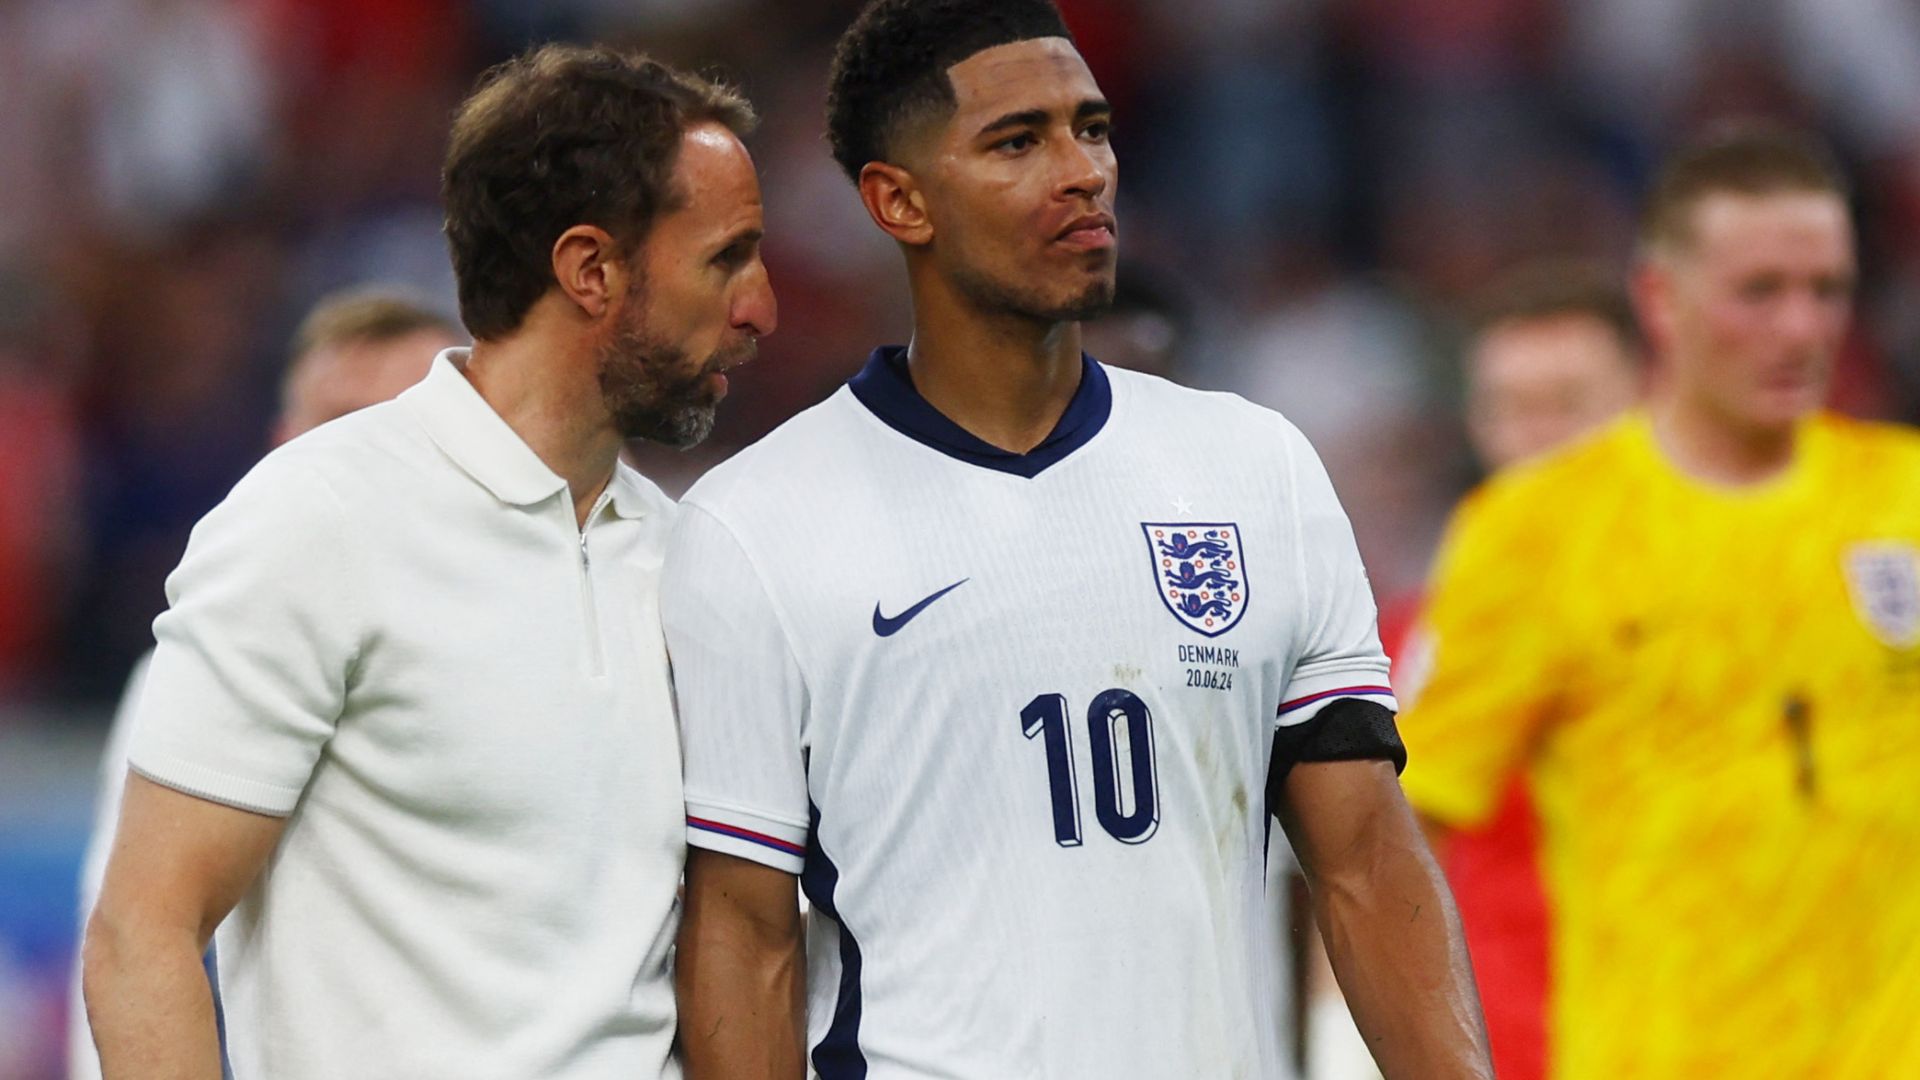 'Disorientated' England draw against Denmark after squandering early lead